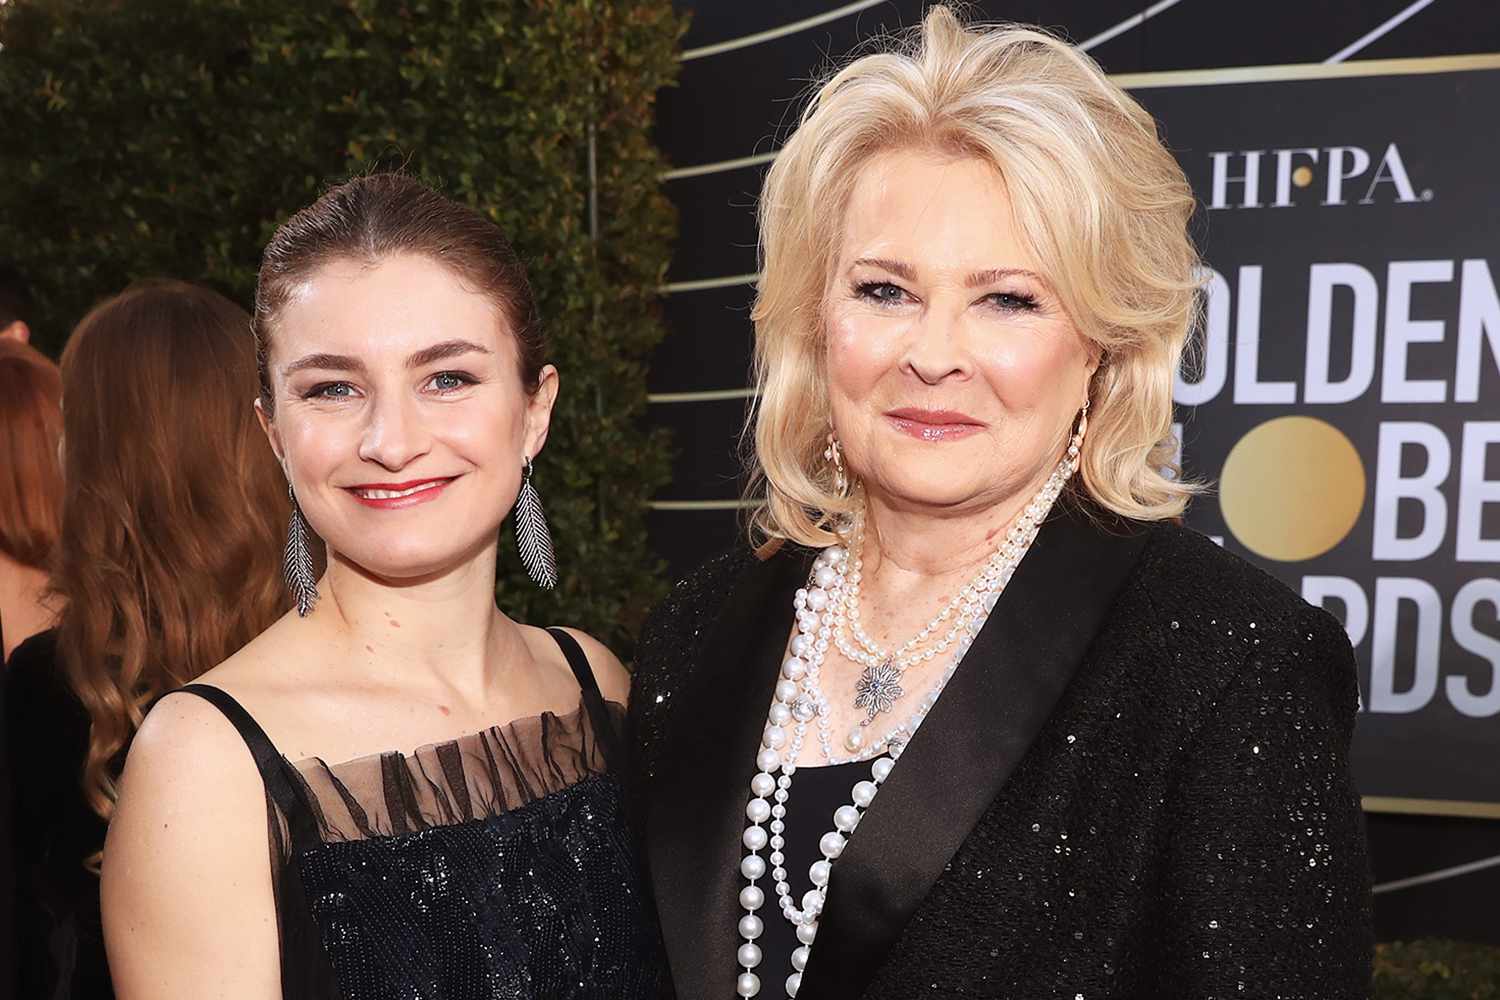 All About Candice Bergen's Daughter, Chloe Malle